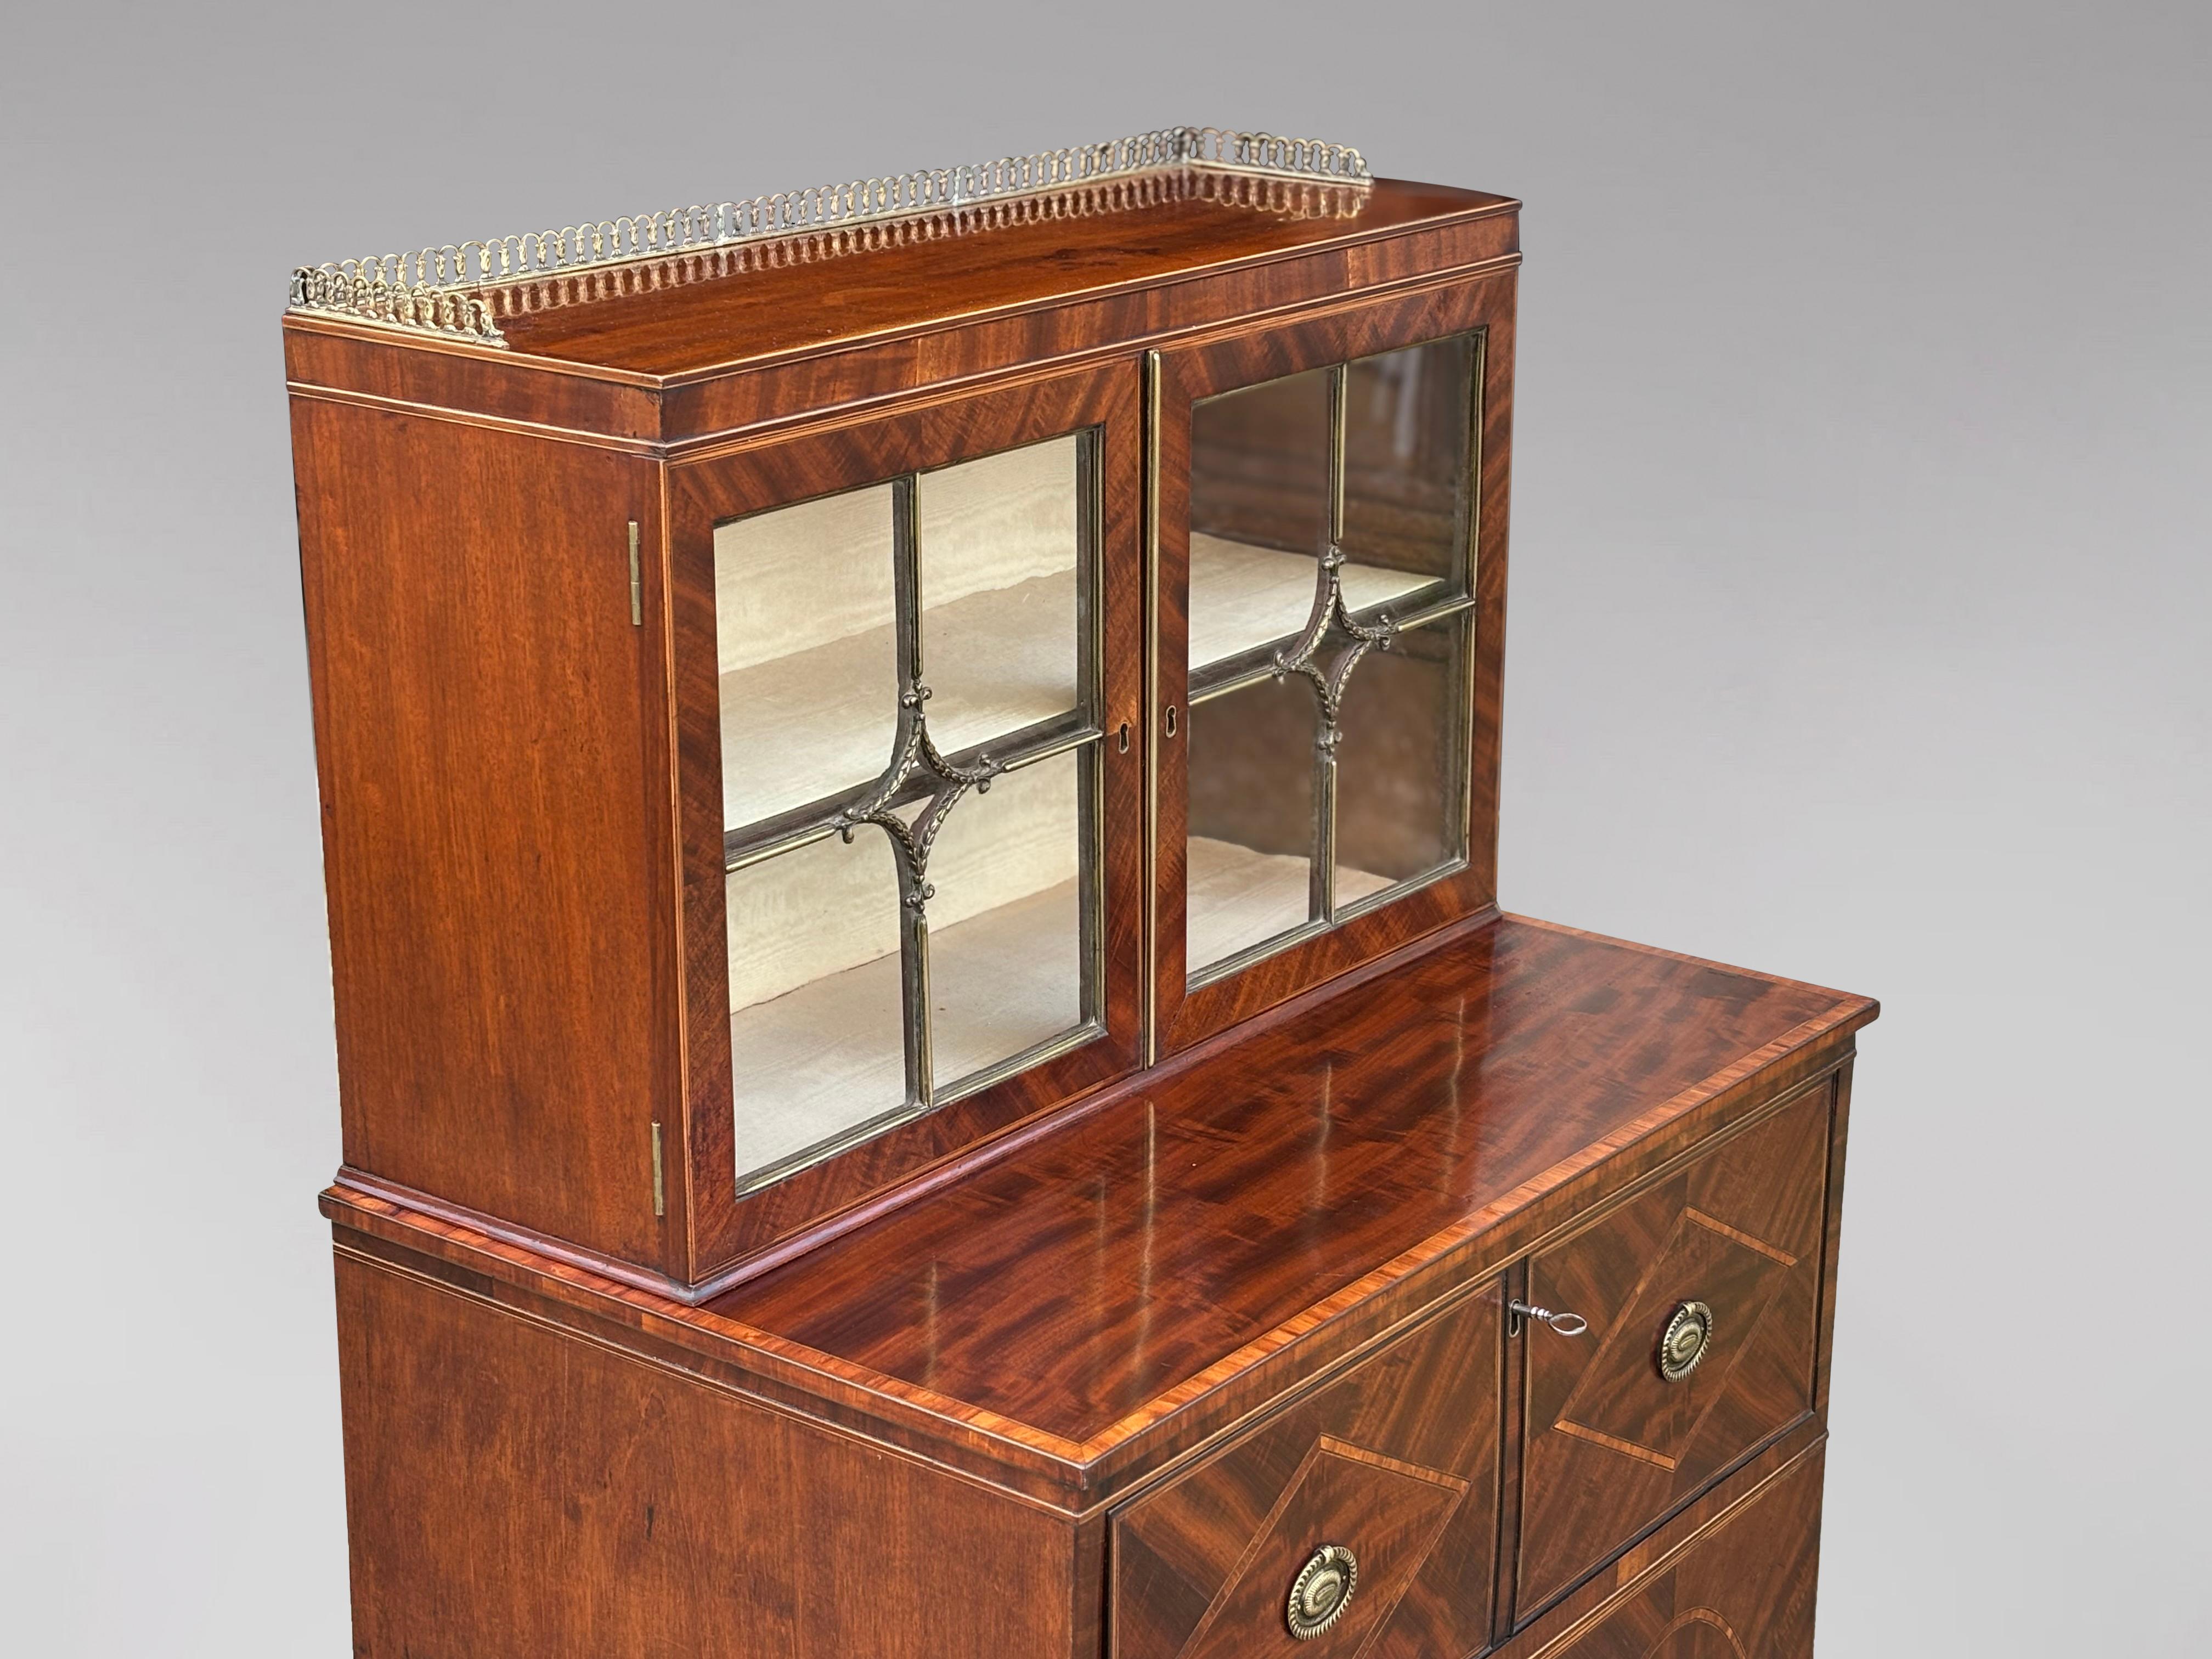 Polished Early 19th Century Regency Period Mahogany Secretaire Bookcase For Sale